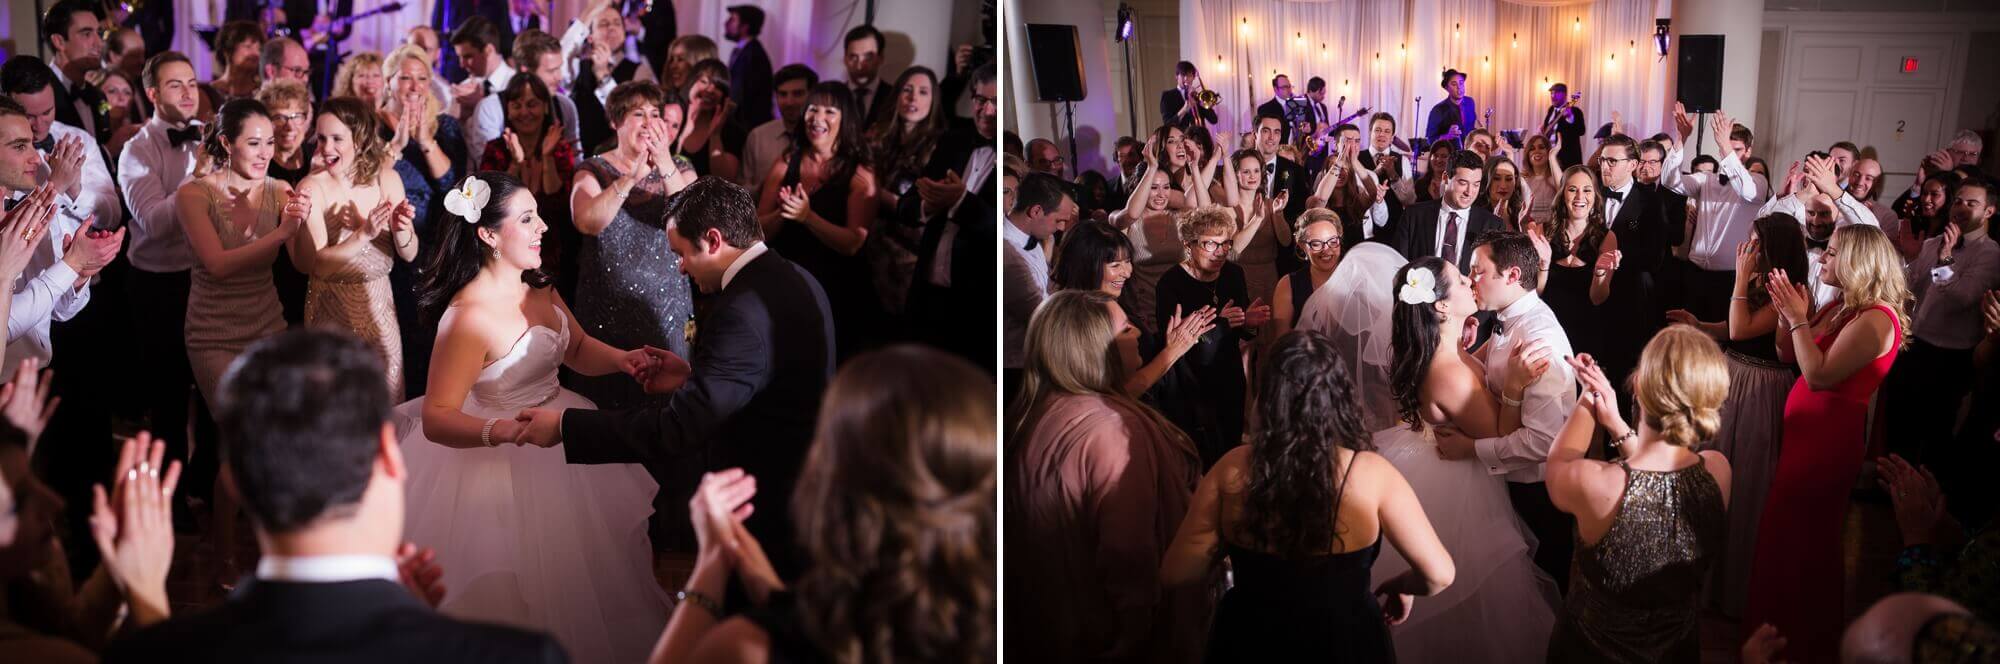 Portraits of the bride and groom kissing on the dance floor surrounded by their guests at the Omni King Edward Hotel in Toronto